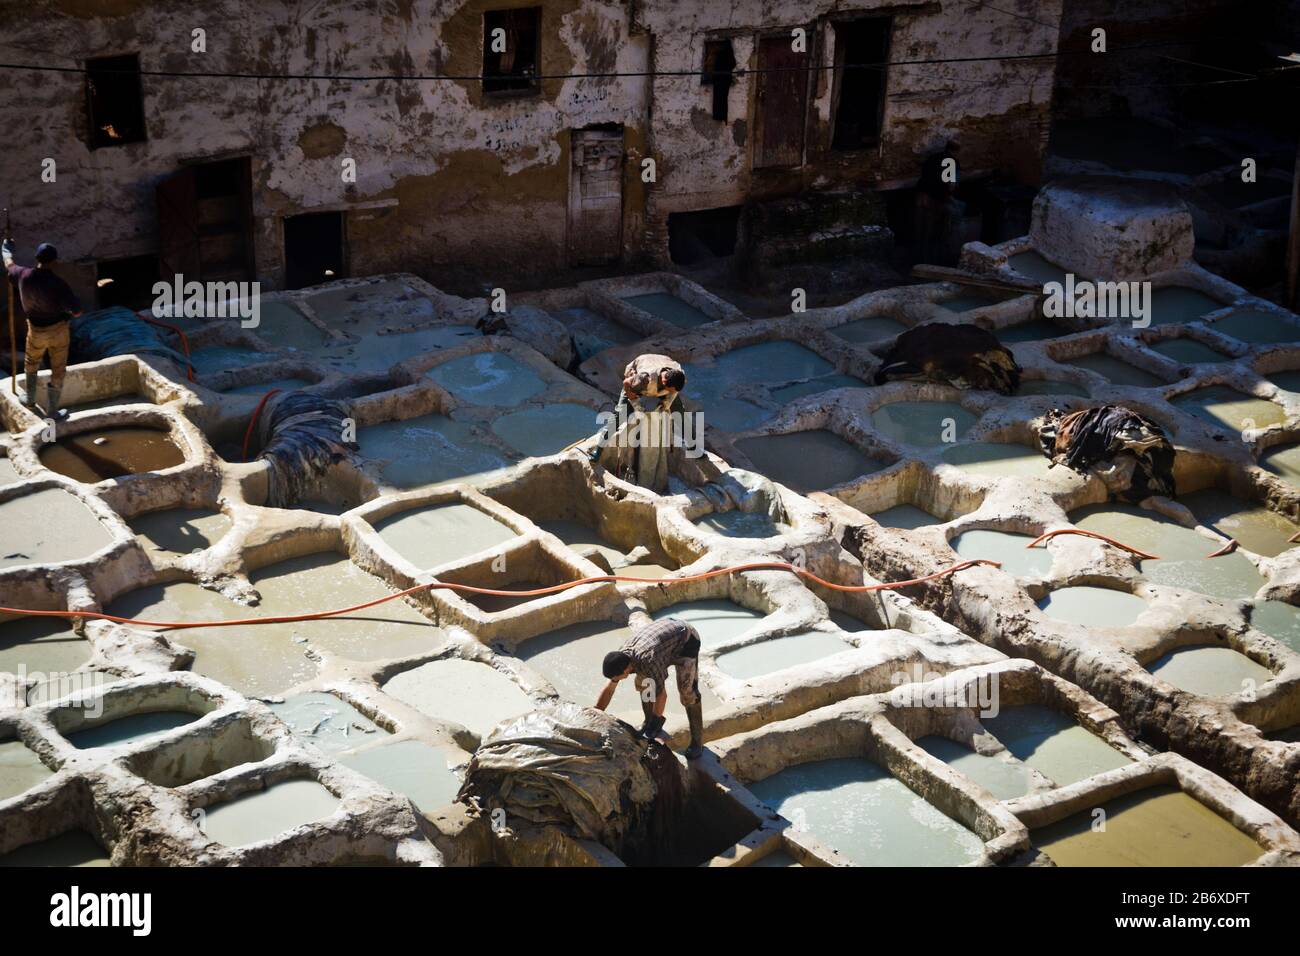 Workers wash and bleach leathers in the Tanners Quarter of Fes, Morocco Stock Photo